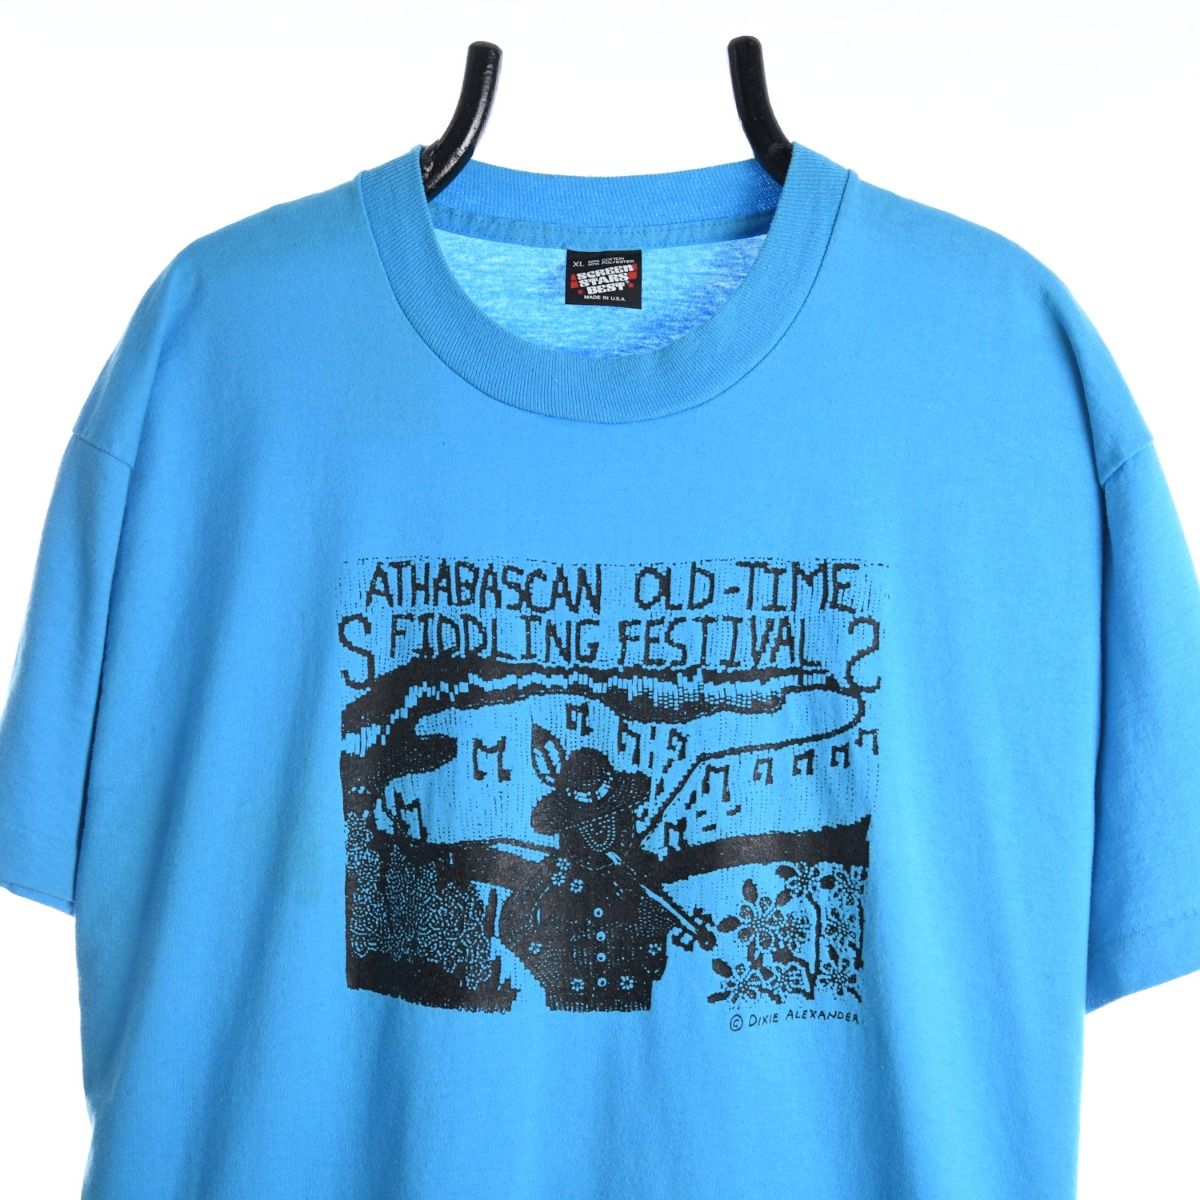 'Athabascan Old-Time Fiddling Festival' 1990s T-Shirt